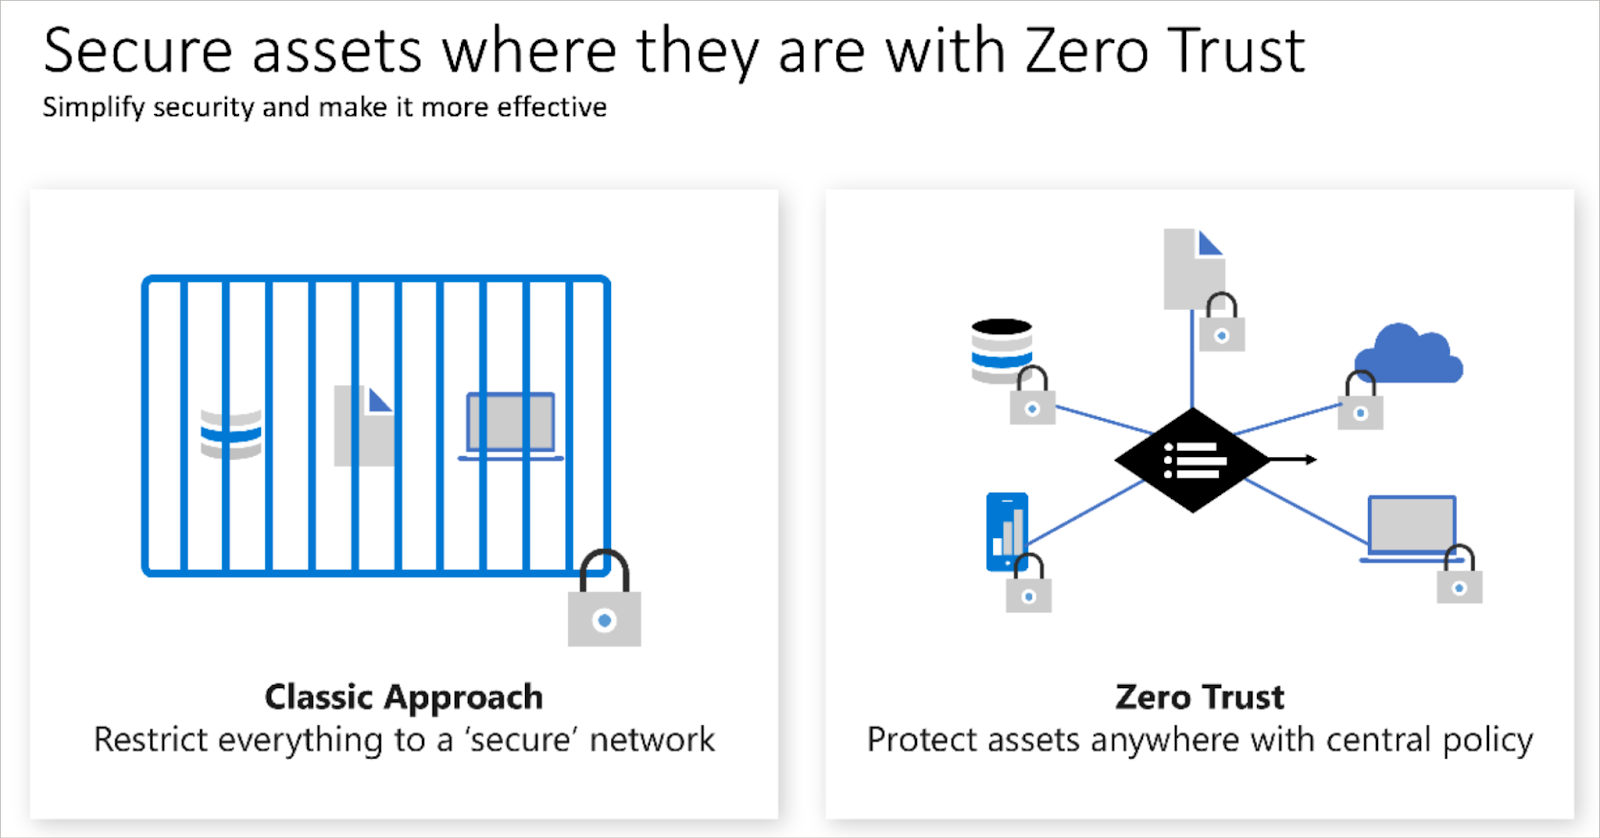 A pictorial description of classic security approach and zero trust. [source Microsoft]